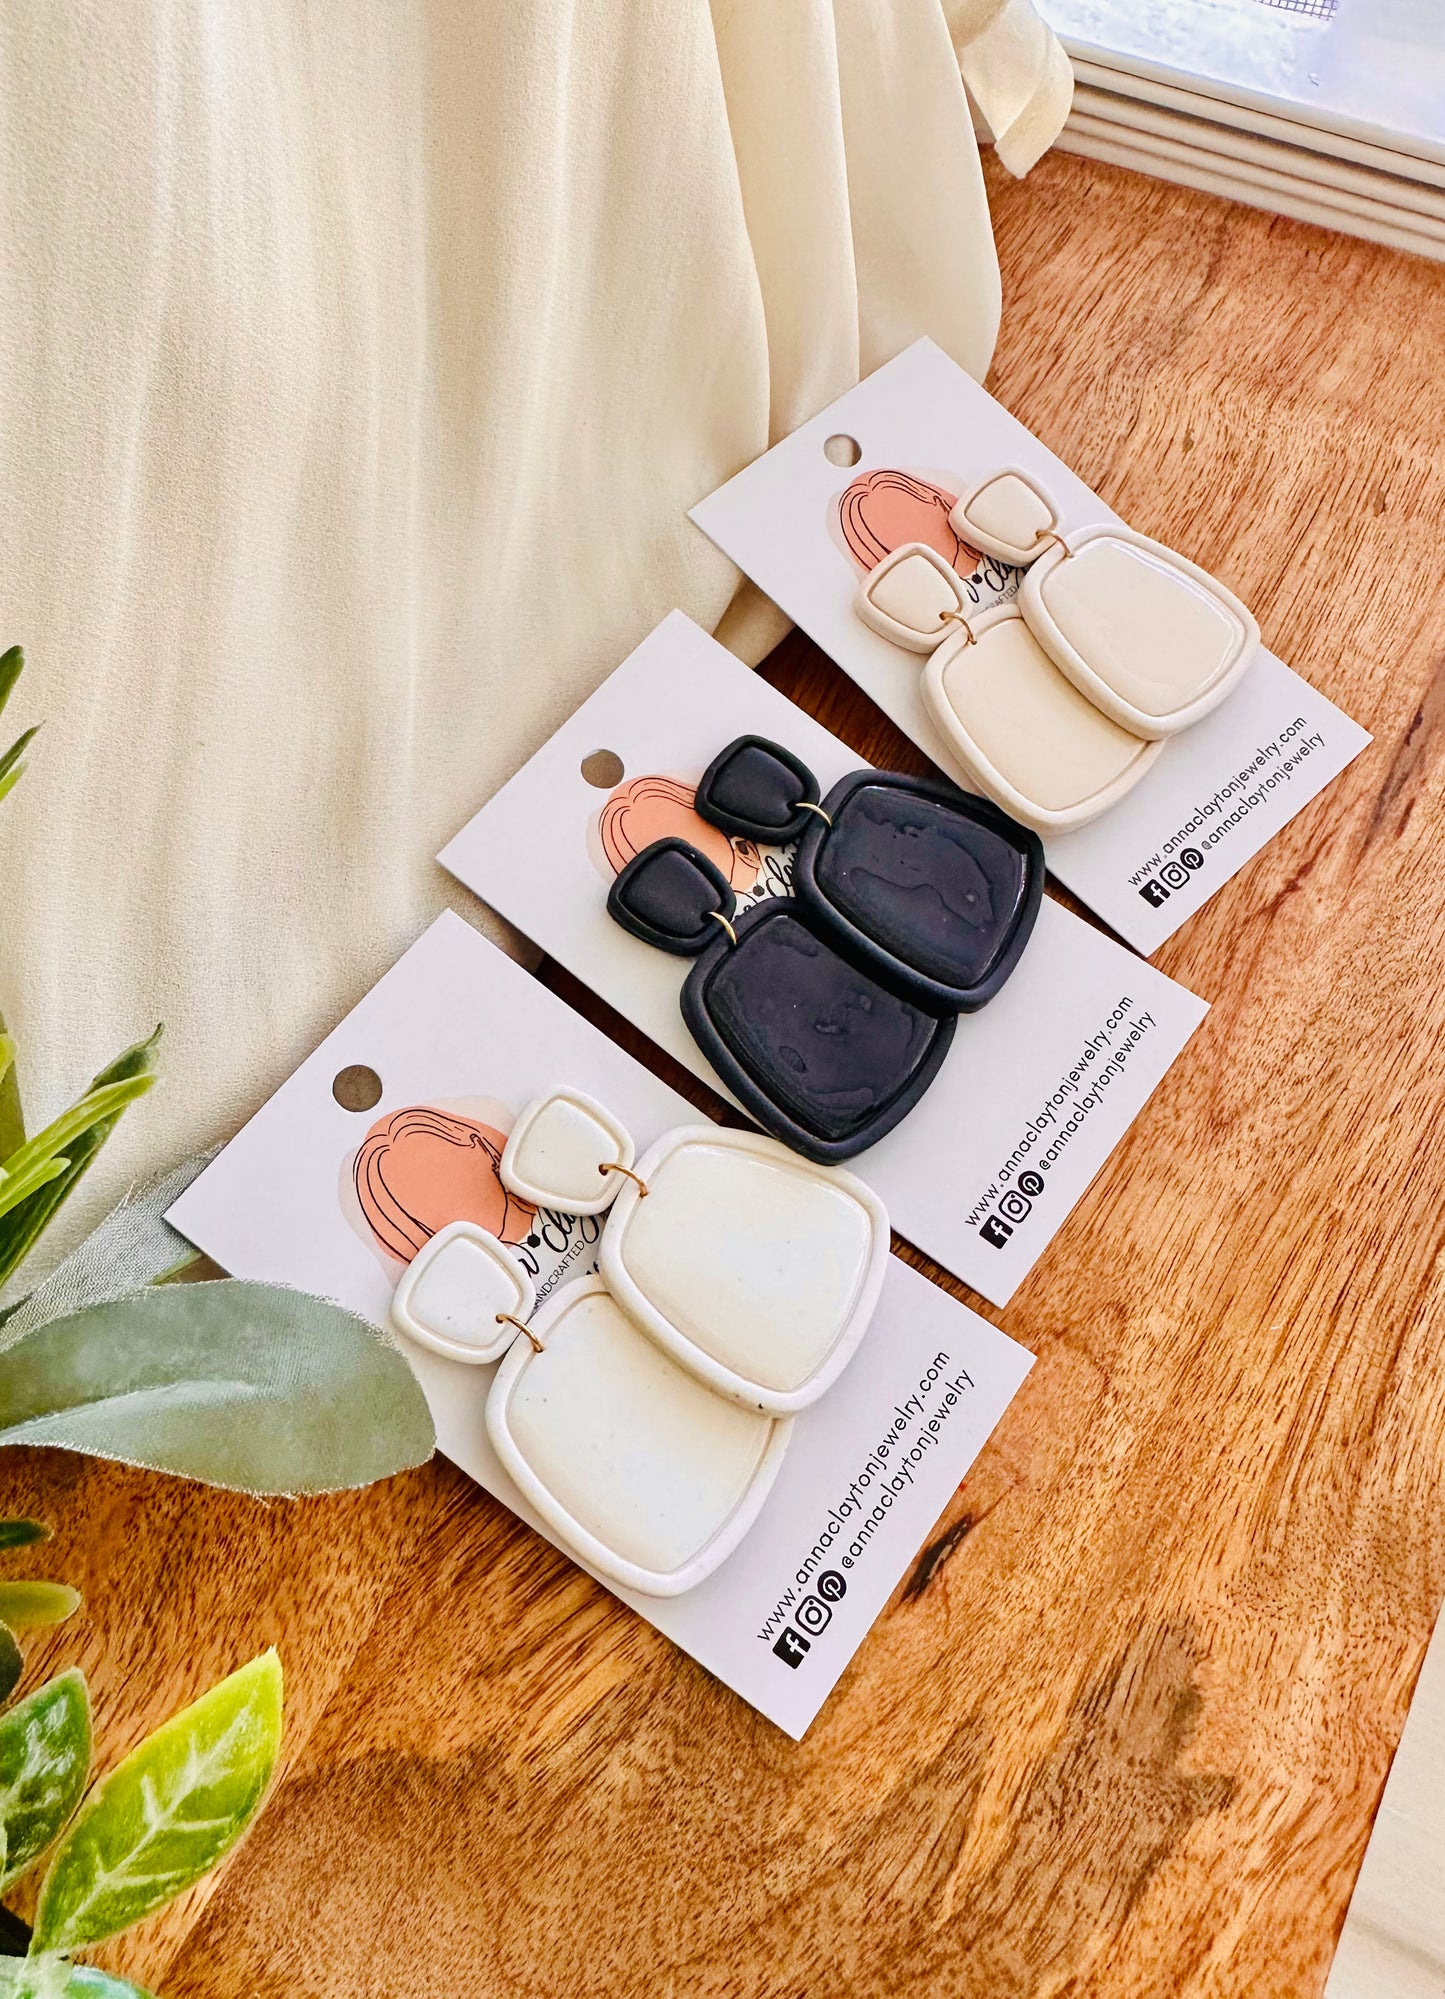 The Moira Clay Statement Earrings